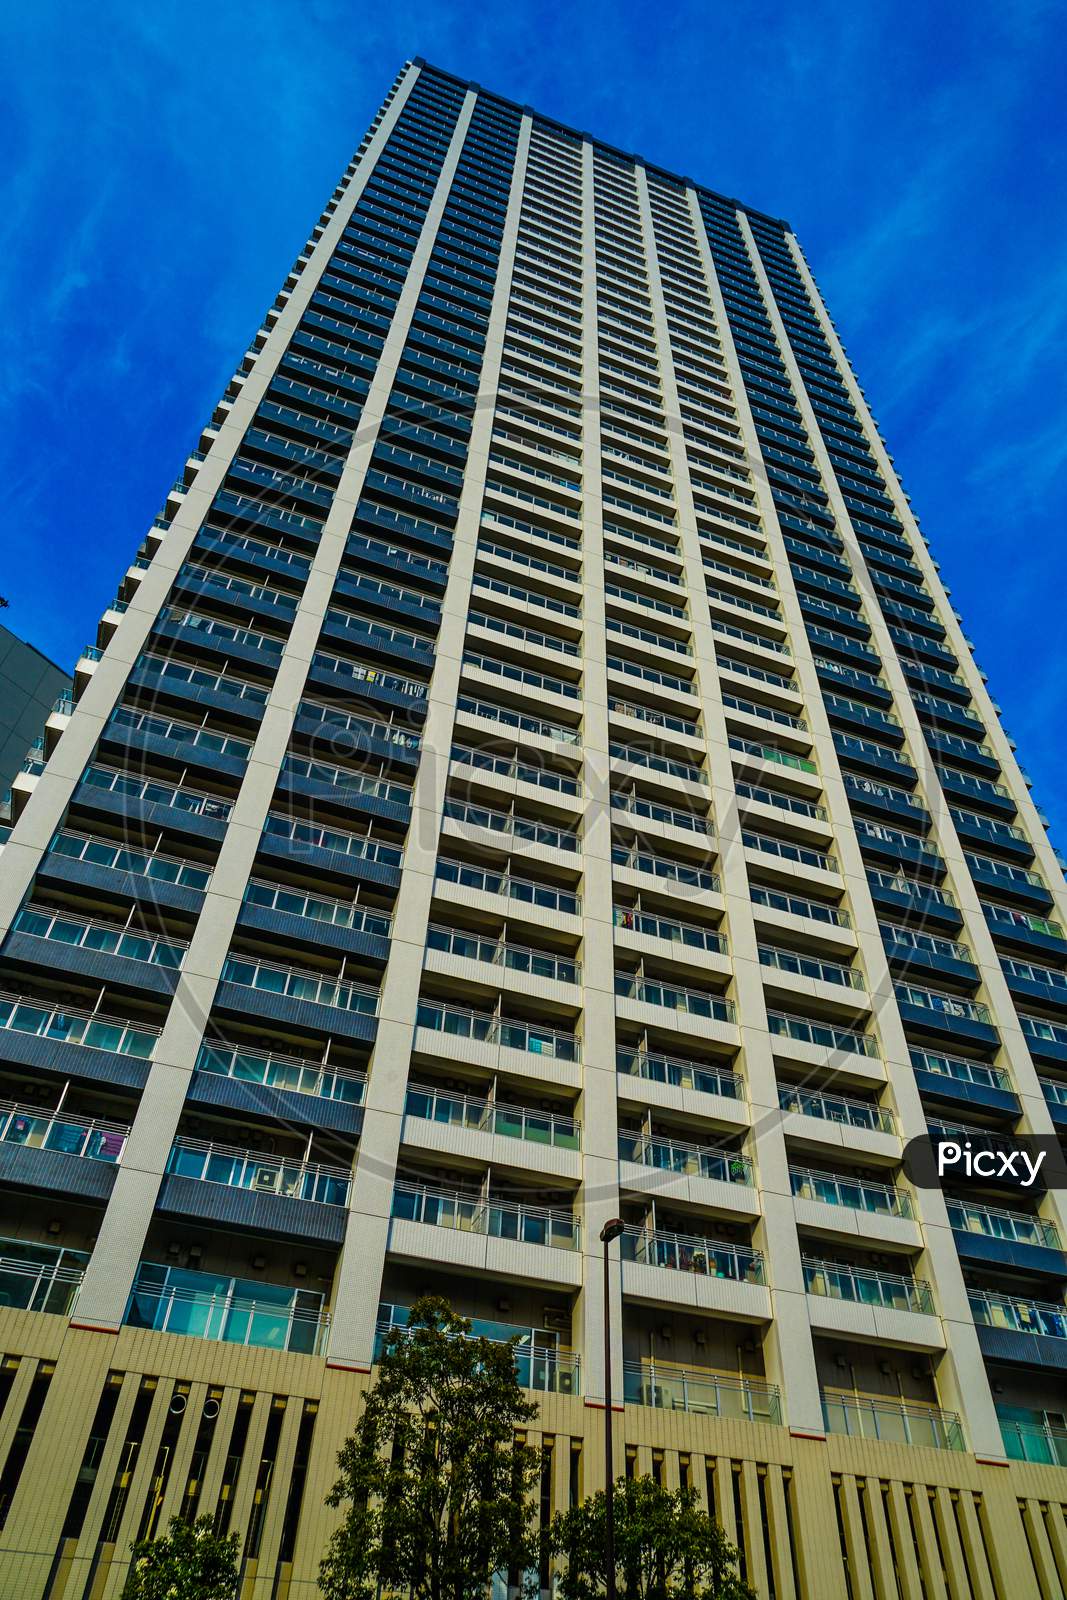 Image Of High-Rise Apartment